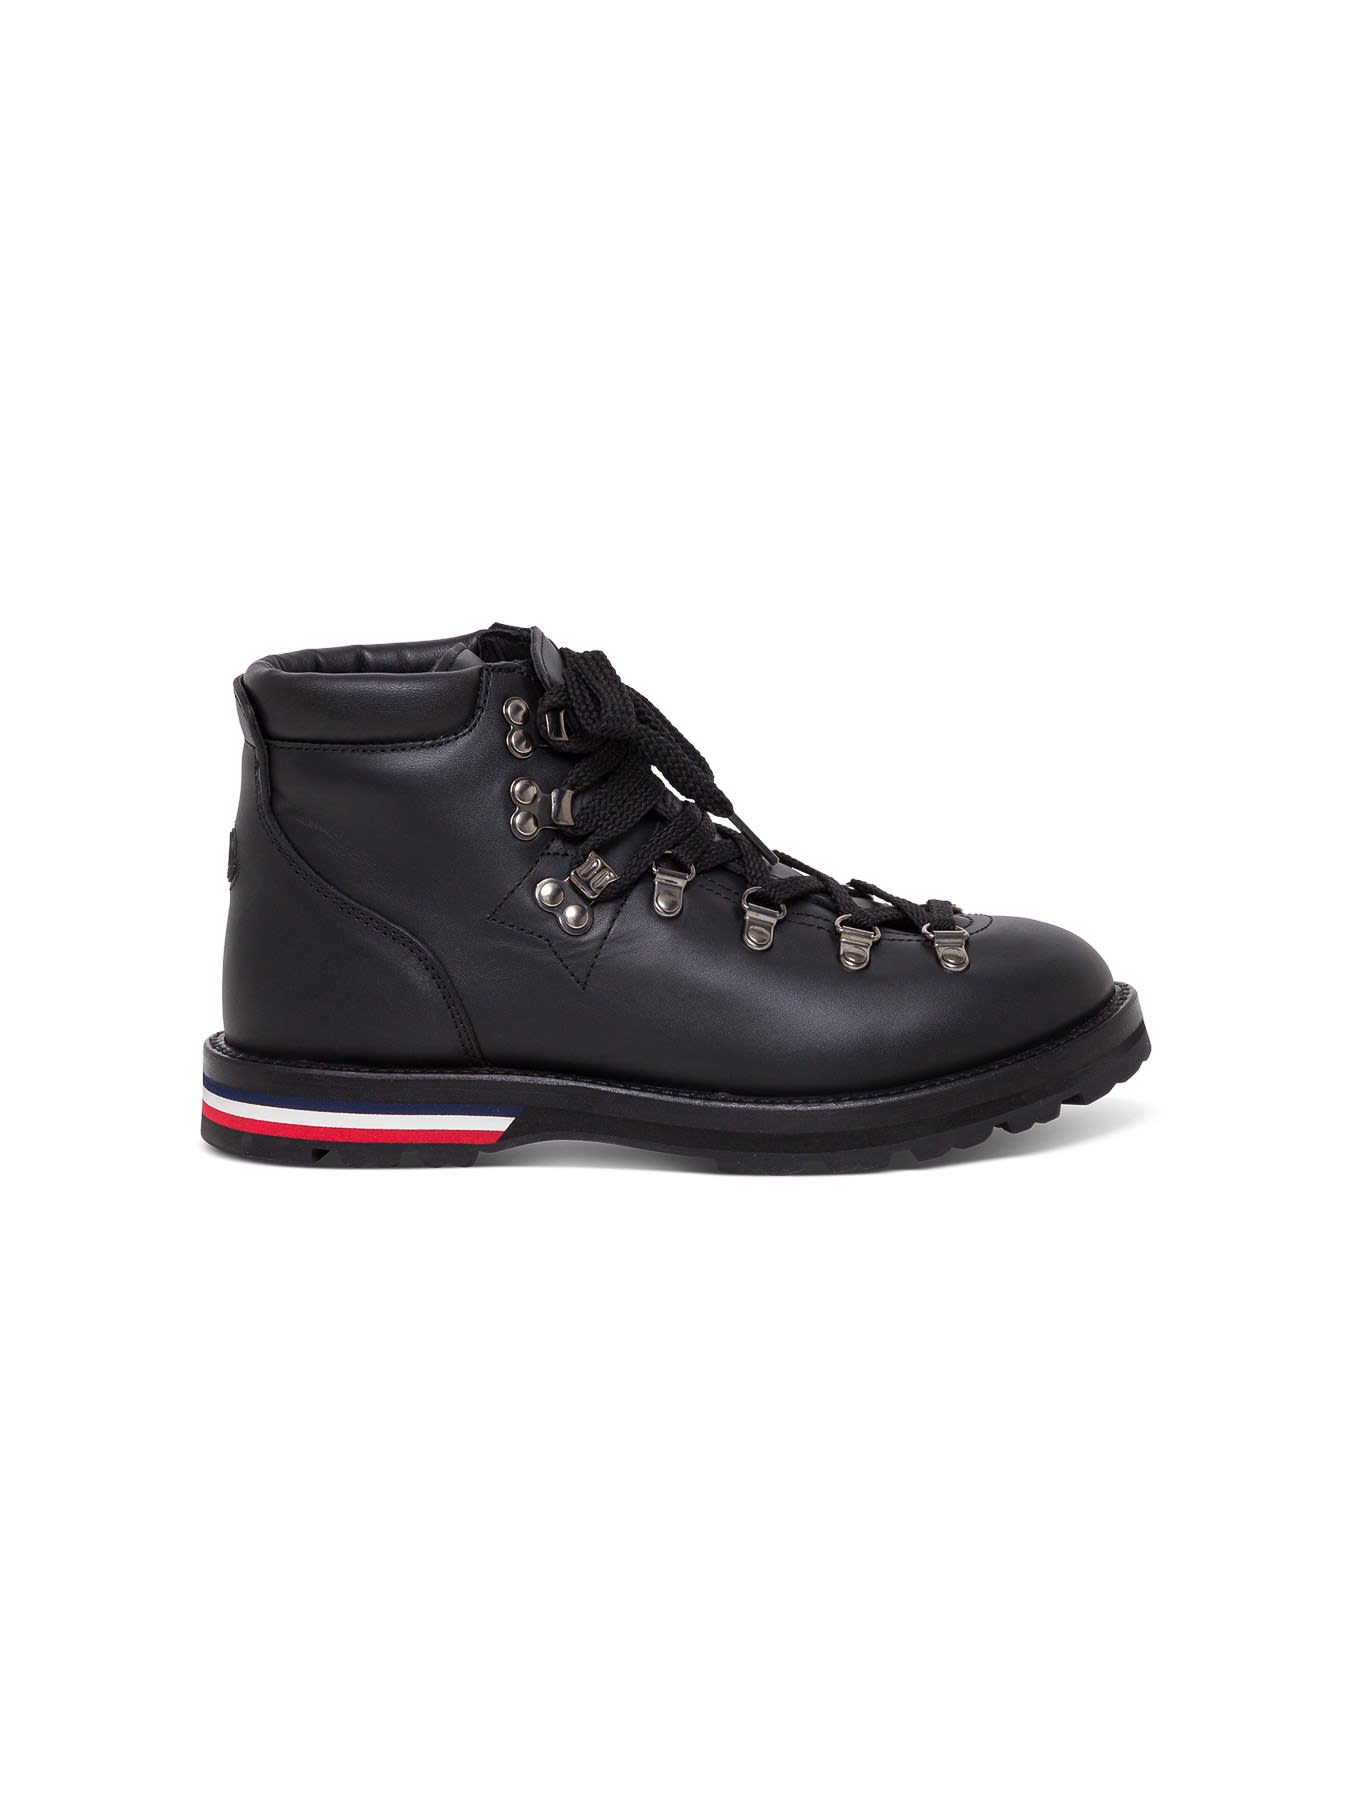 Moncler Leather Ankle Boots With Tricolor Sole